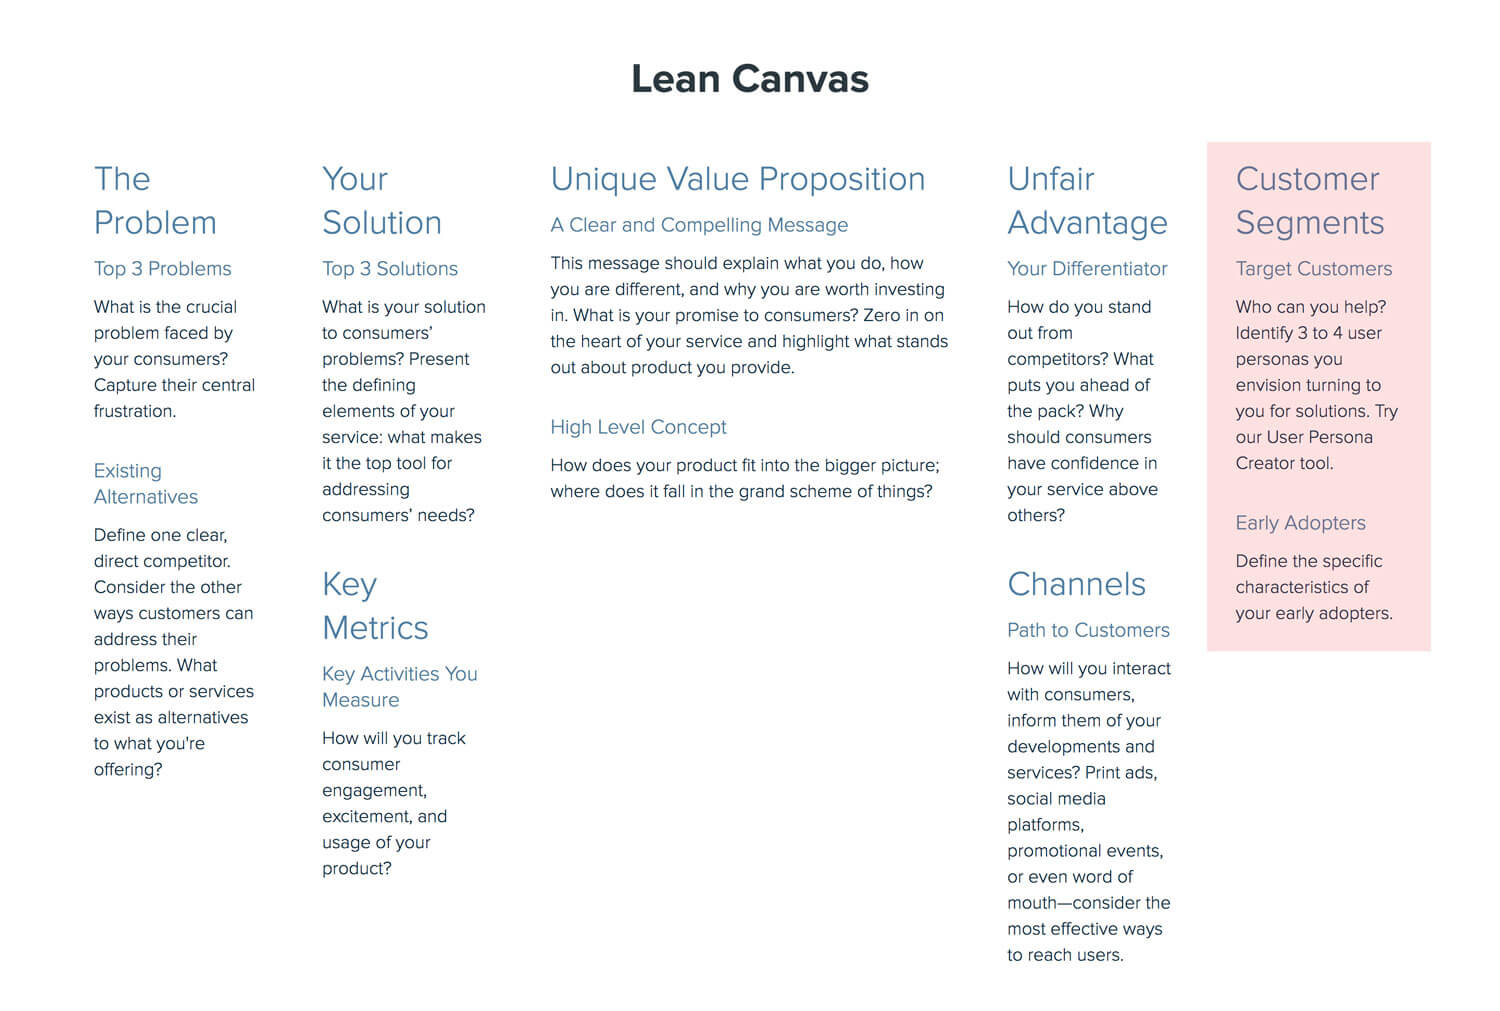 Lean Canvas: Customer Segments and Early Adopters